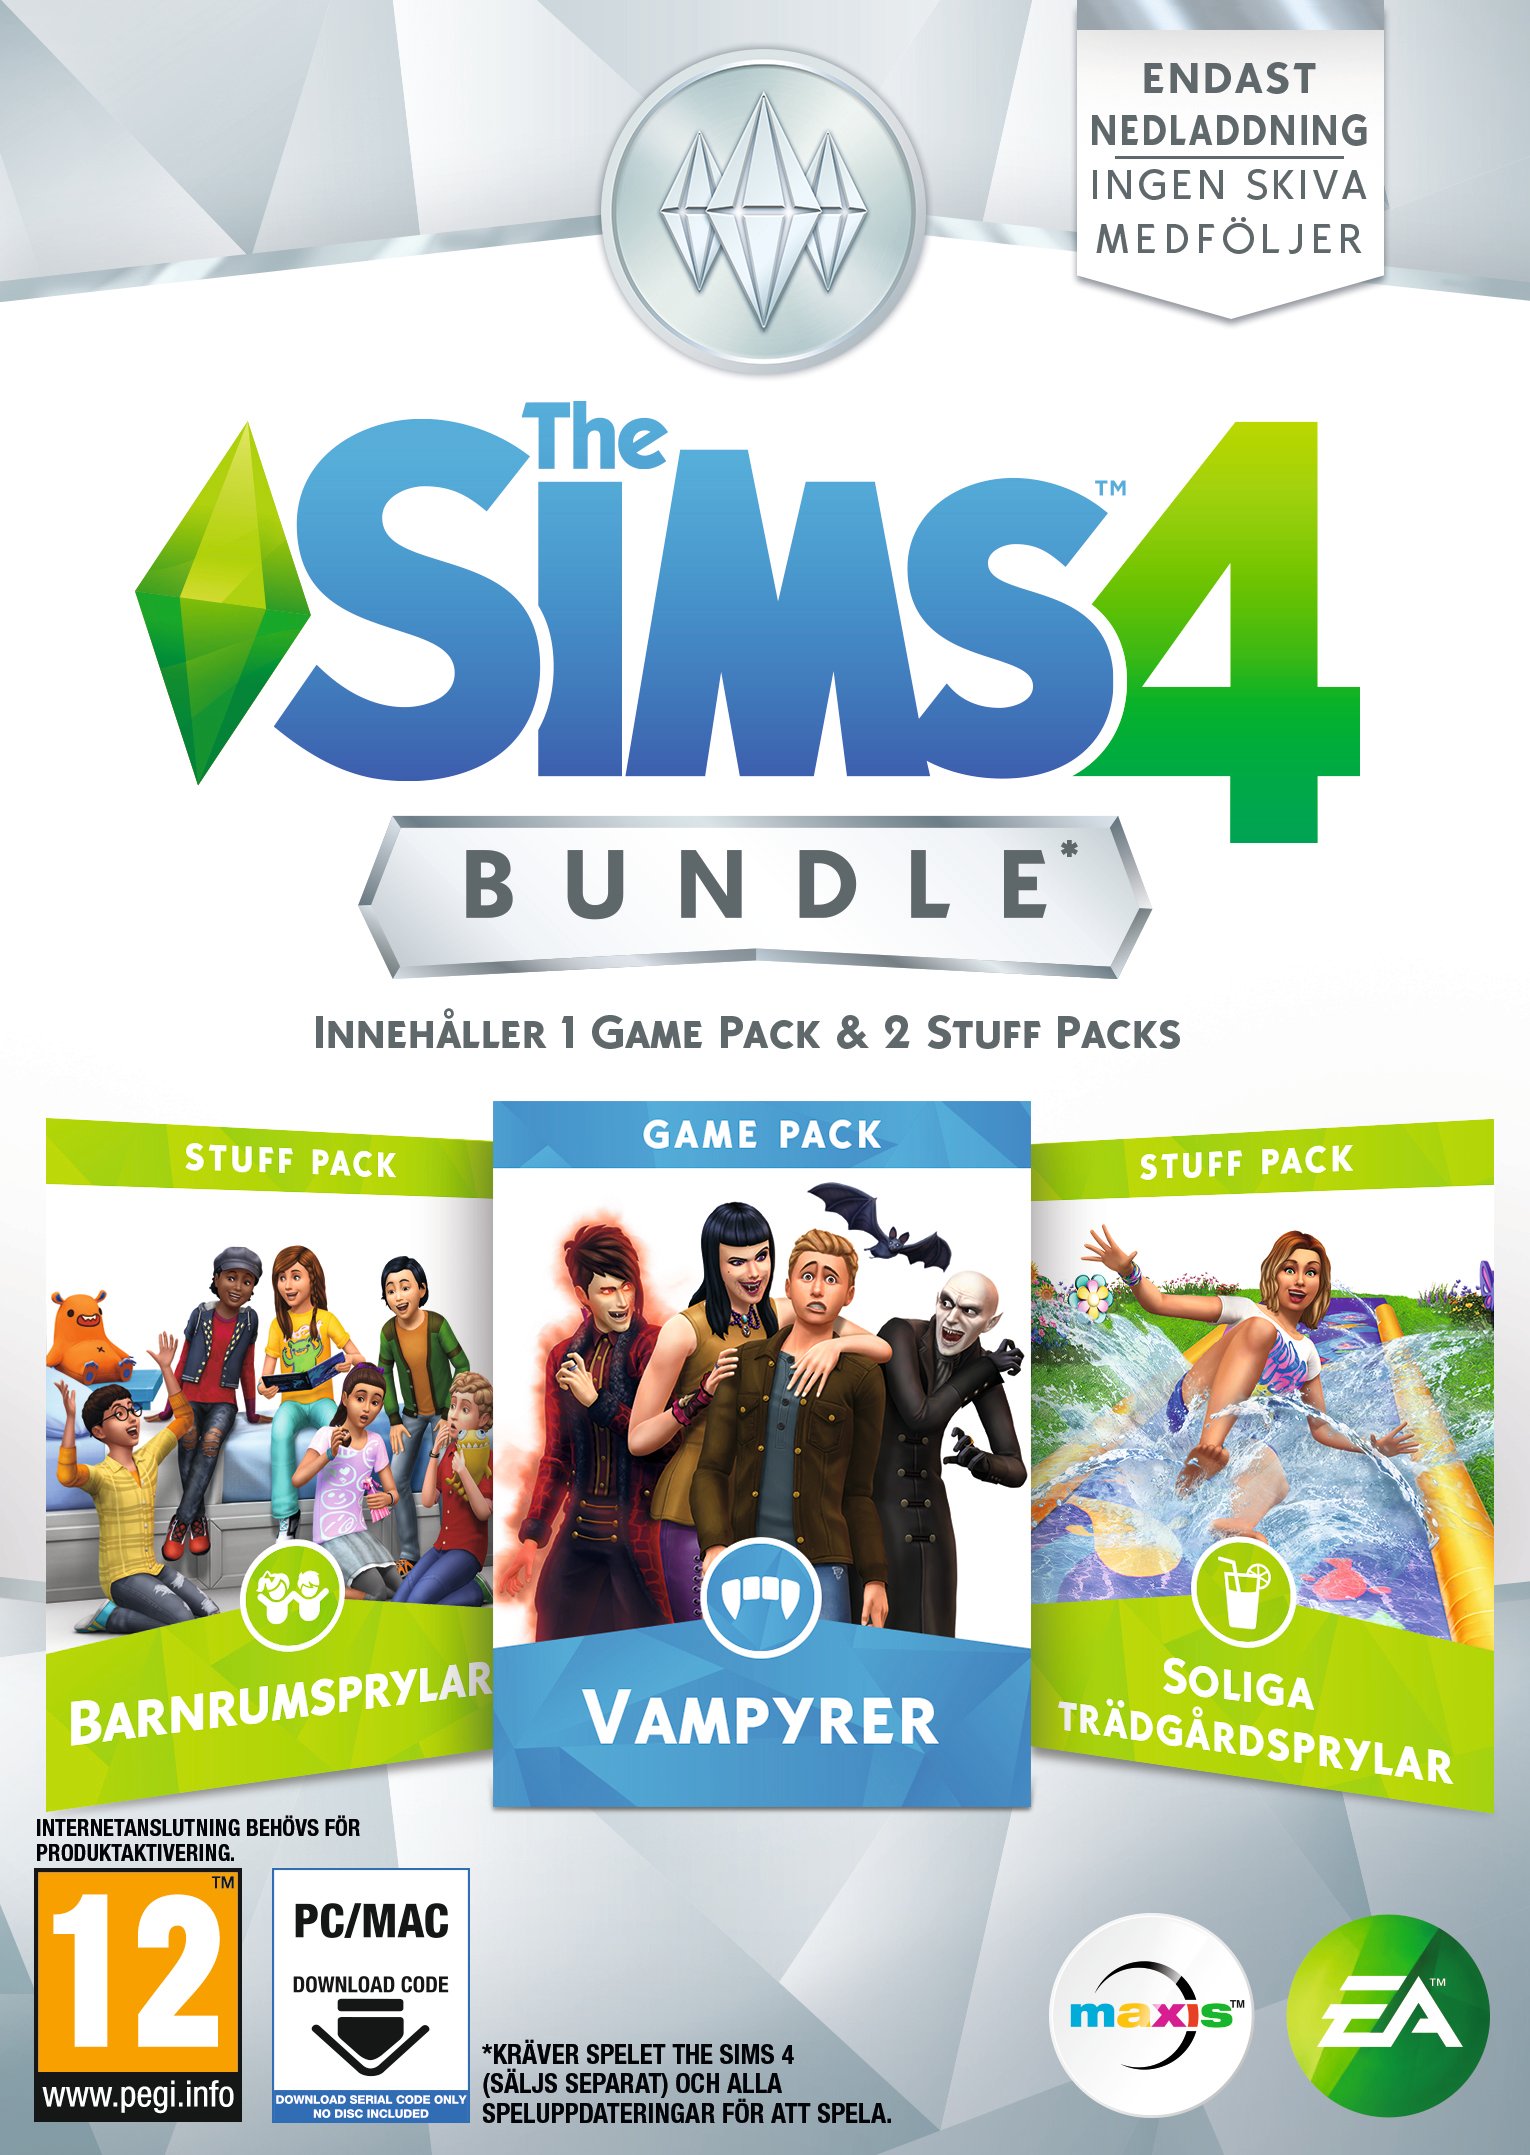 sims 4 wii